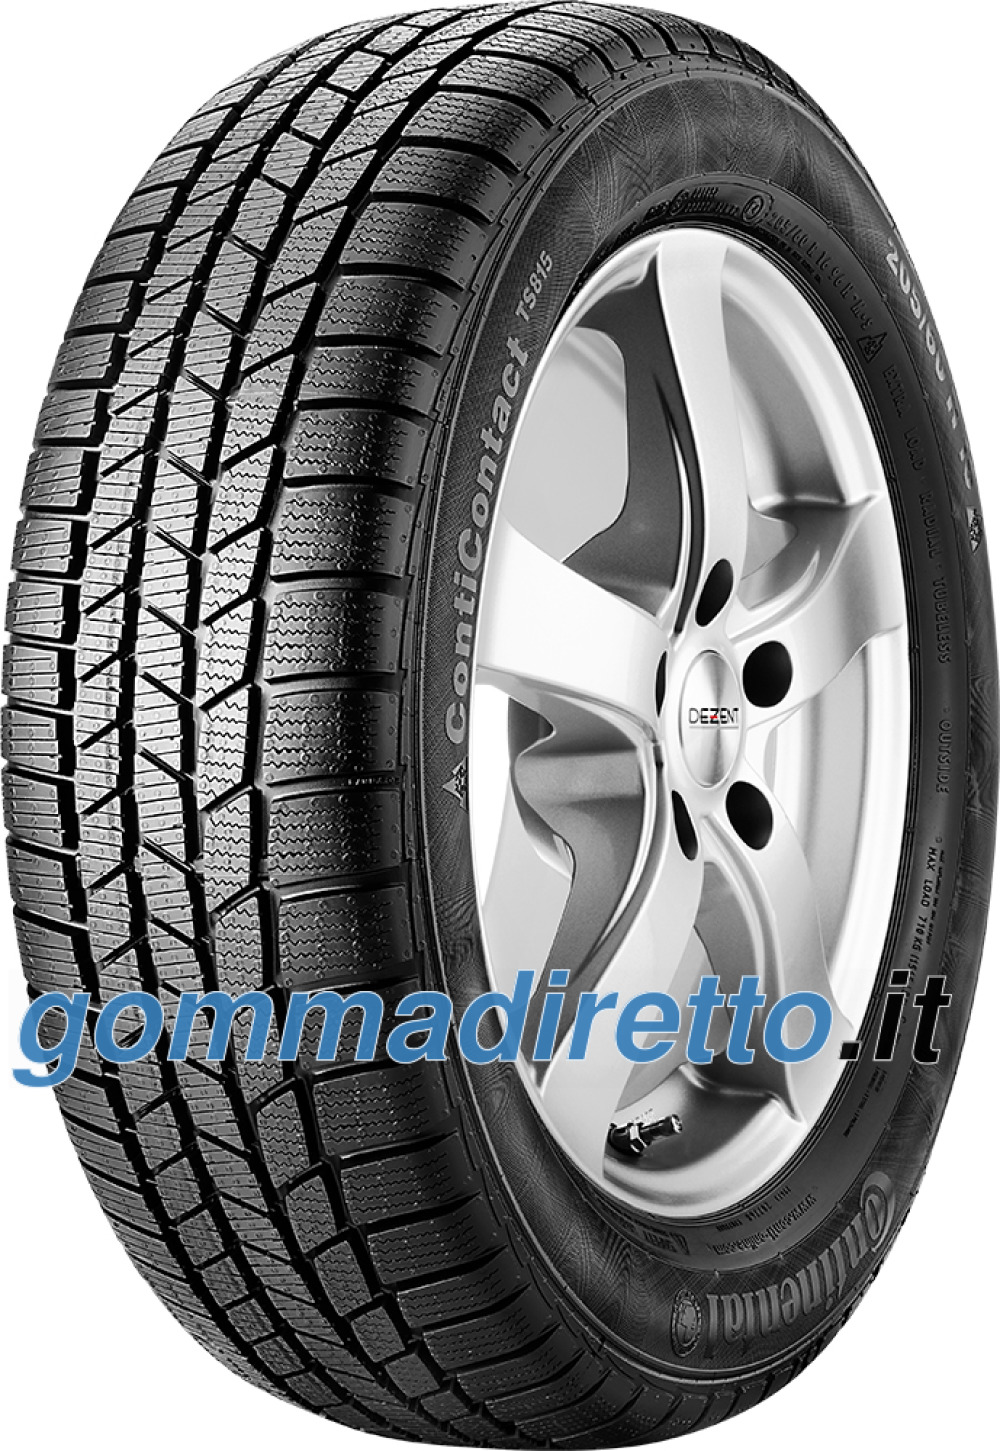 Image of Continental ContiContact TS815 ( 205/60 R16 96H XL Conti Seal )